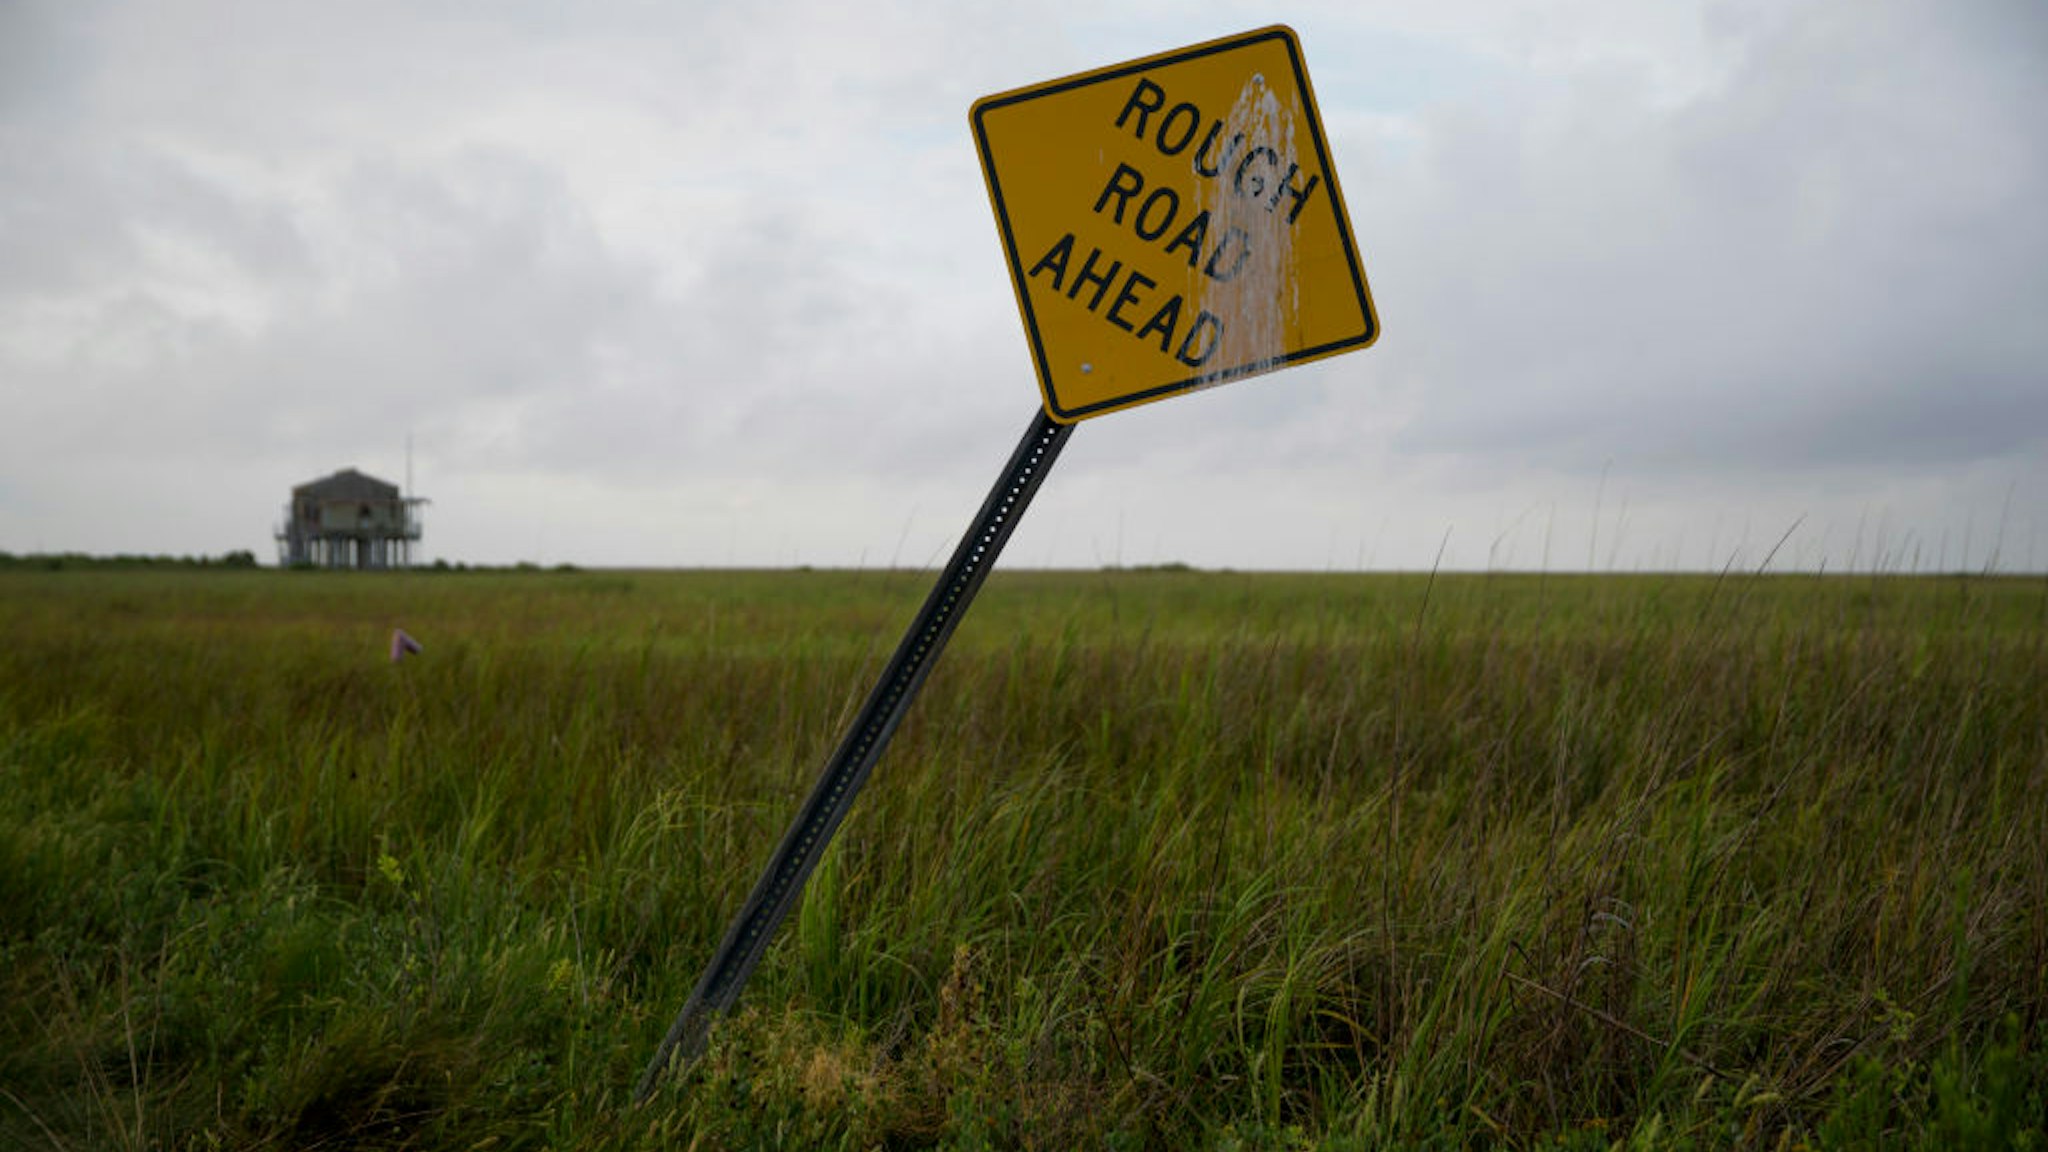 SABINE PASS, TX - AUGUST 26: A general view of a street sign in a field ahead of Hurricane Laura on August 26, 2020 in Sabine Pass, Texas. Hurricane Laura, currently a Category 4 storm, is expected to make landfall along the Gulf Coast late Wednesday and early Thursday. (Photo by Eric Thayer/Getty Images)